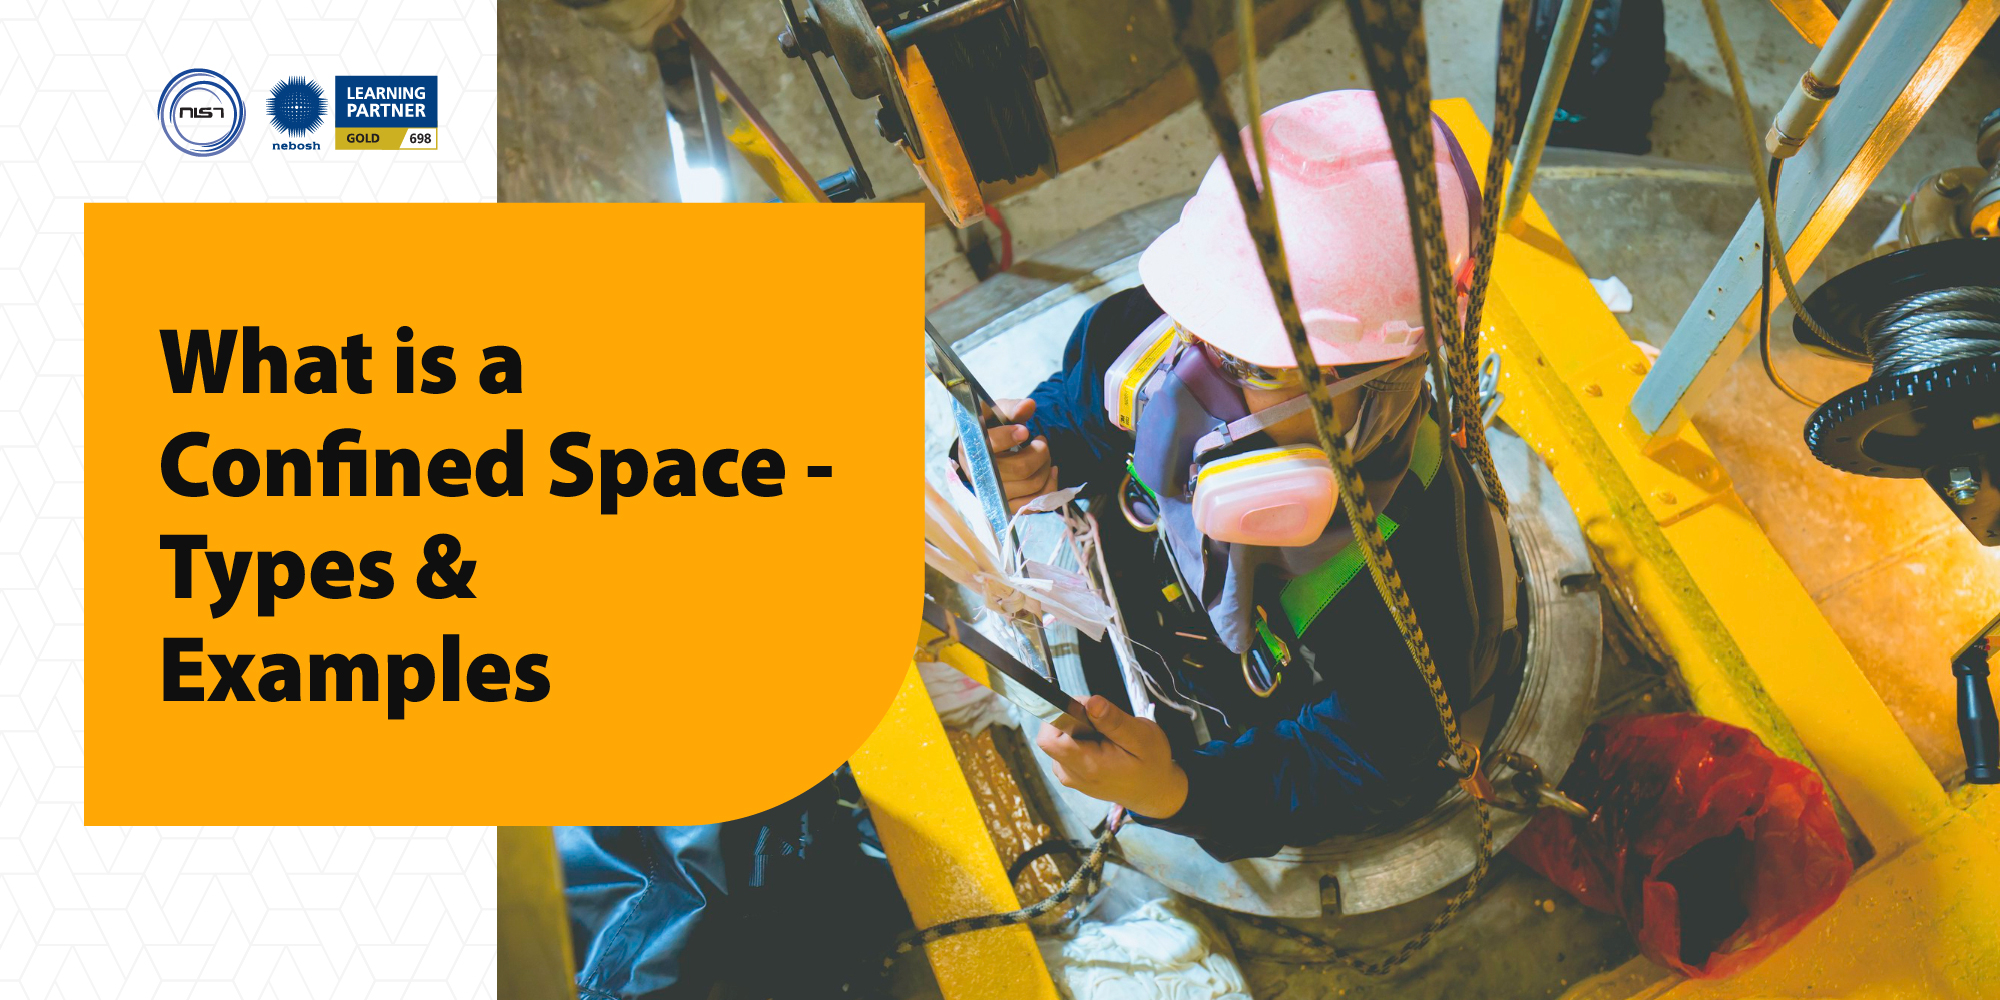 Confined Space Safety: Hazards & Examples